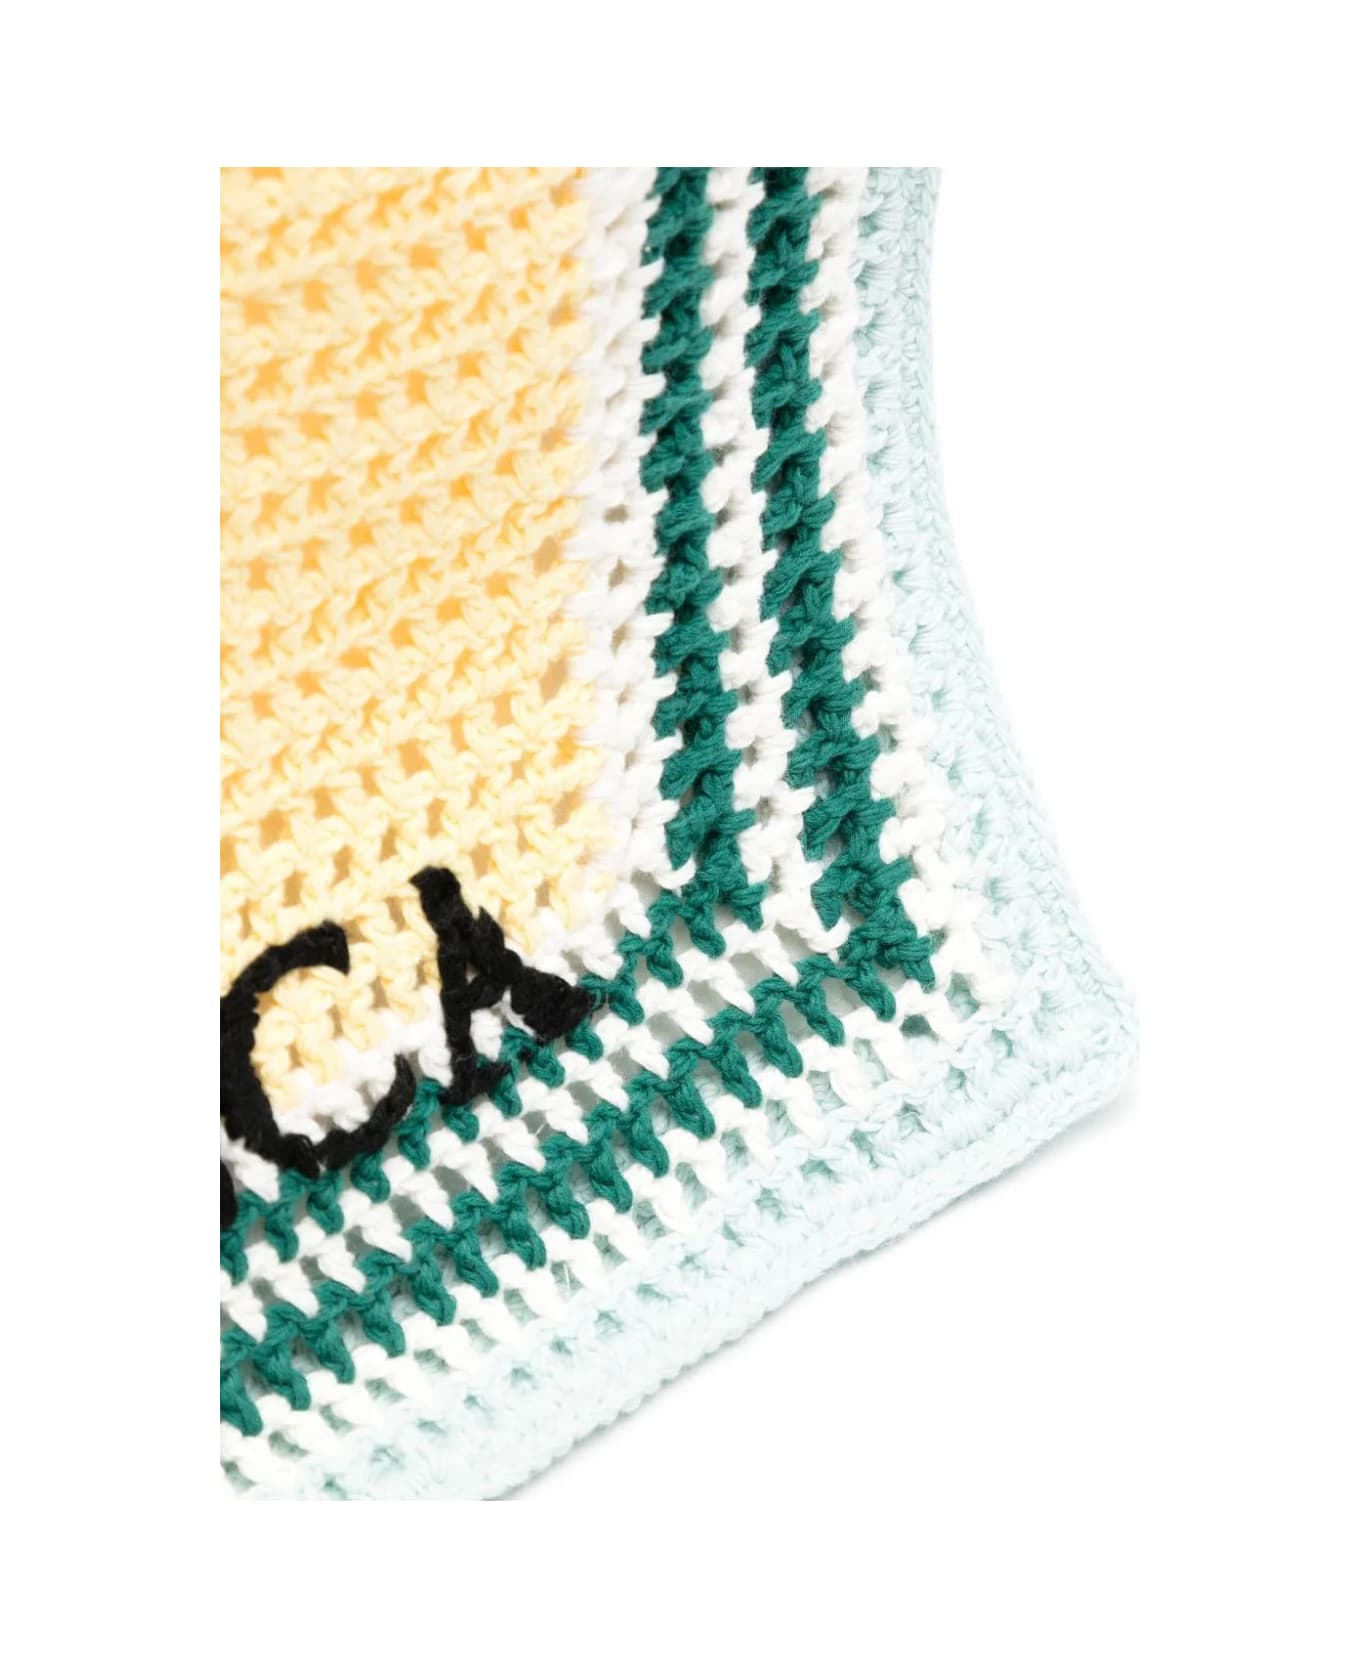 Casablanca Crocheted Tennis Tote Bag In Green, Yellow And White - Yellow